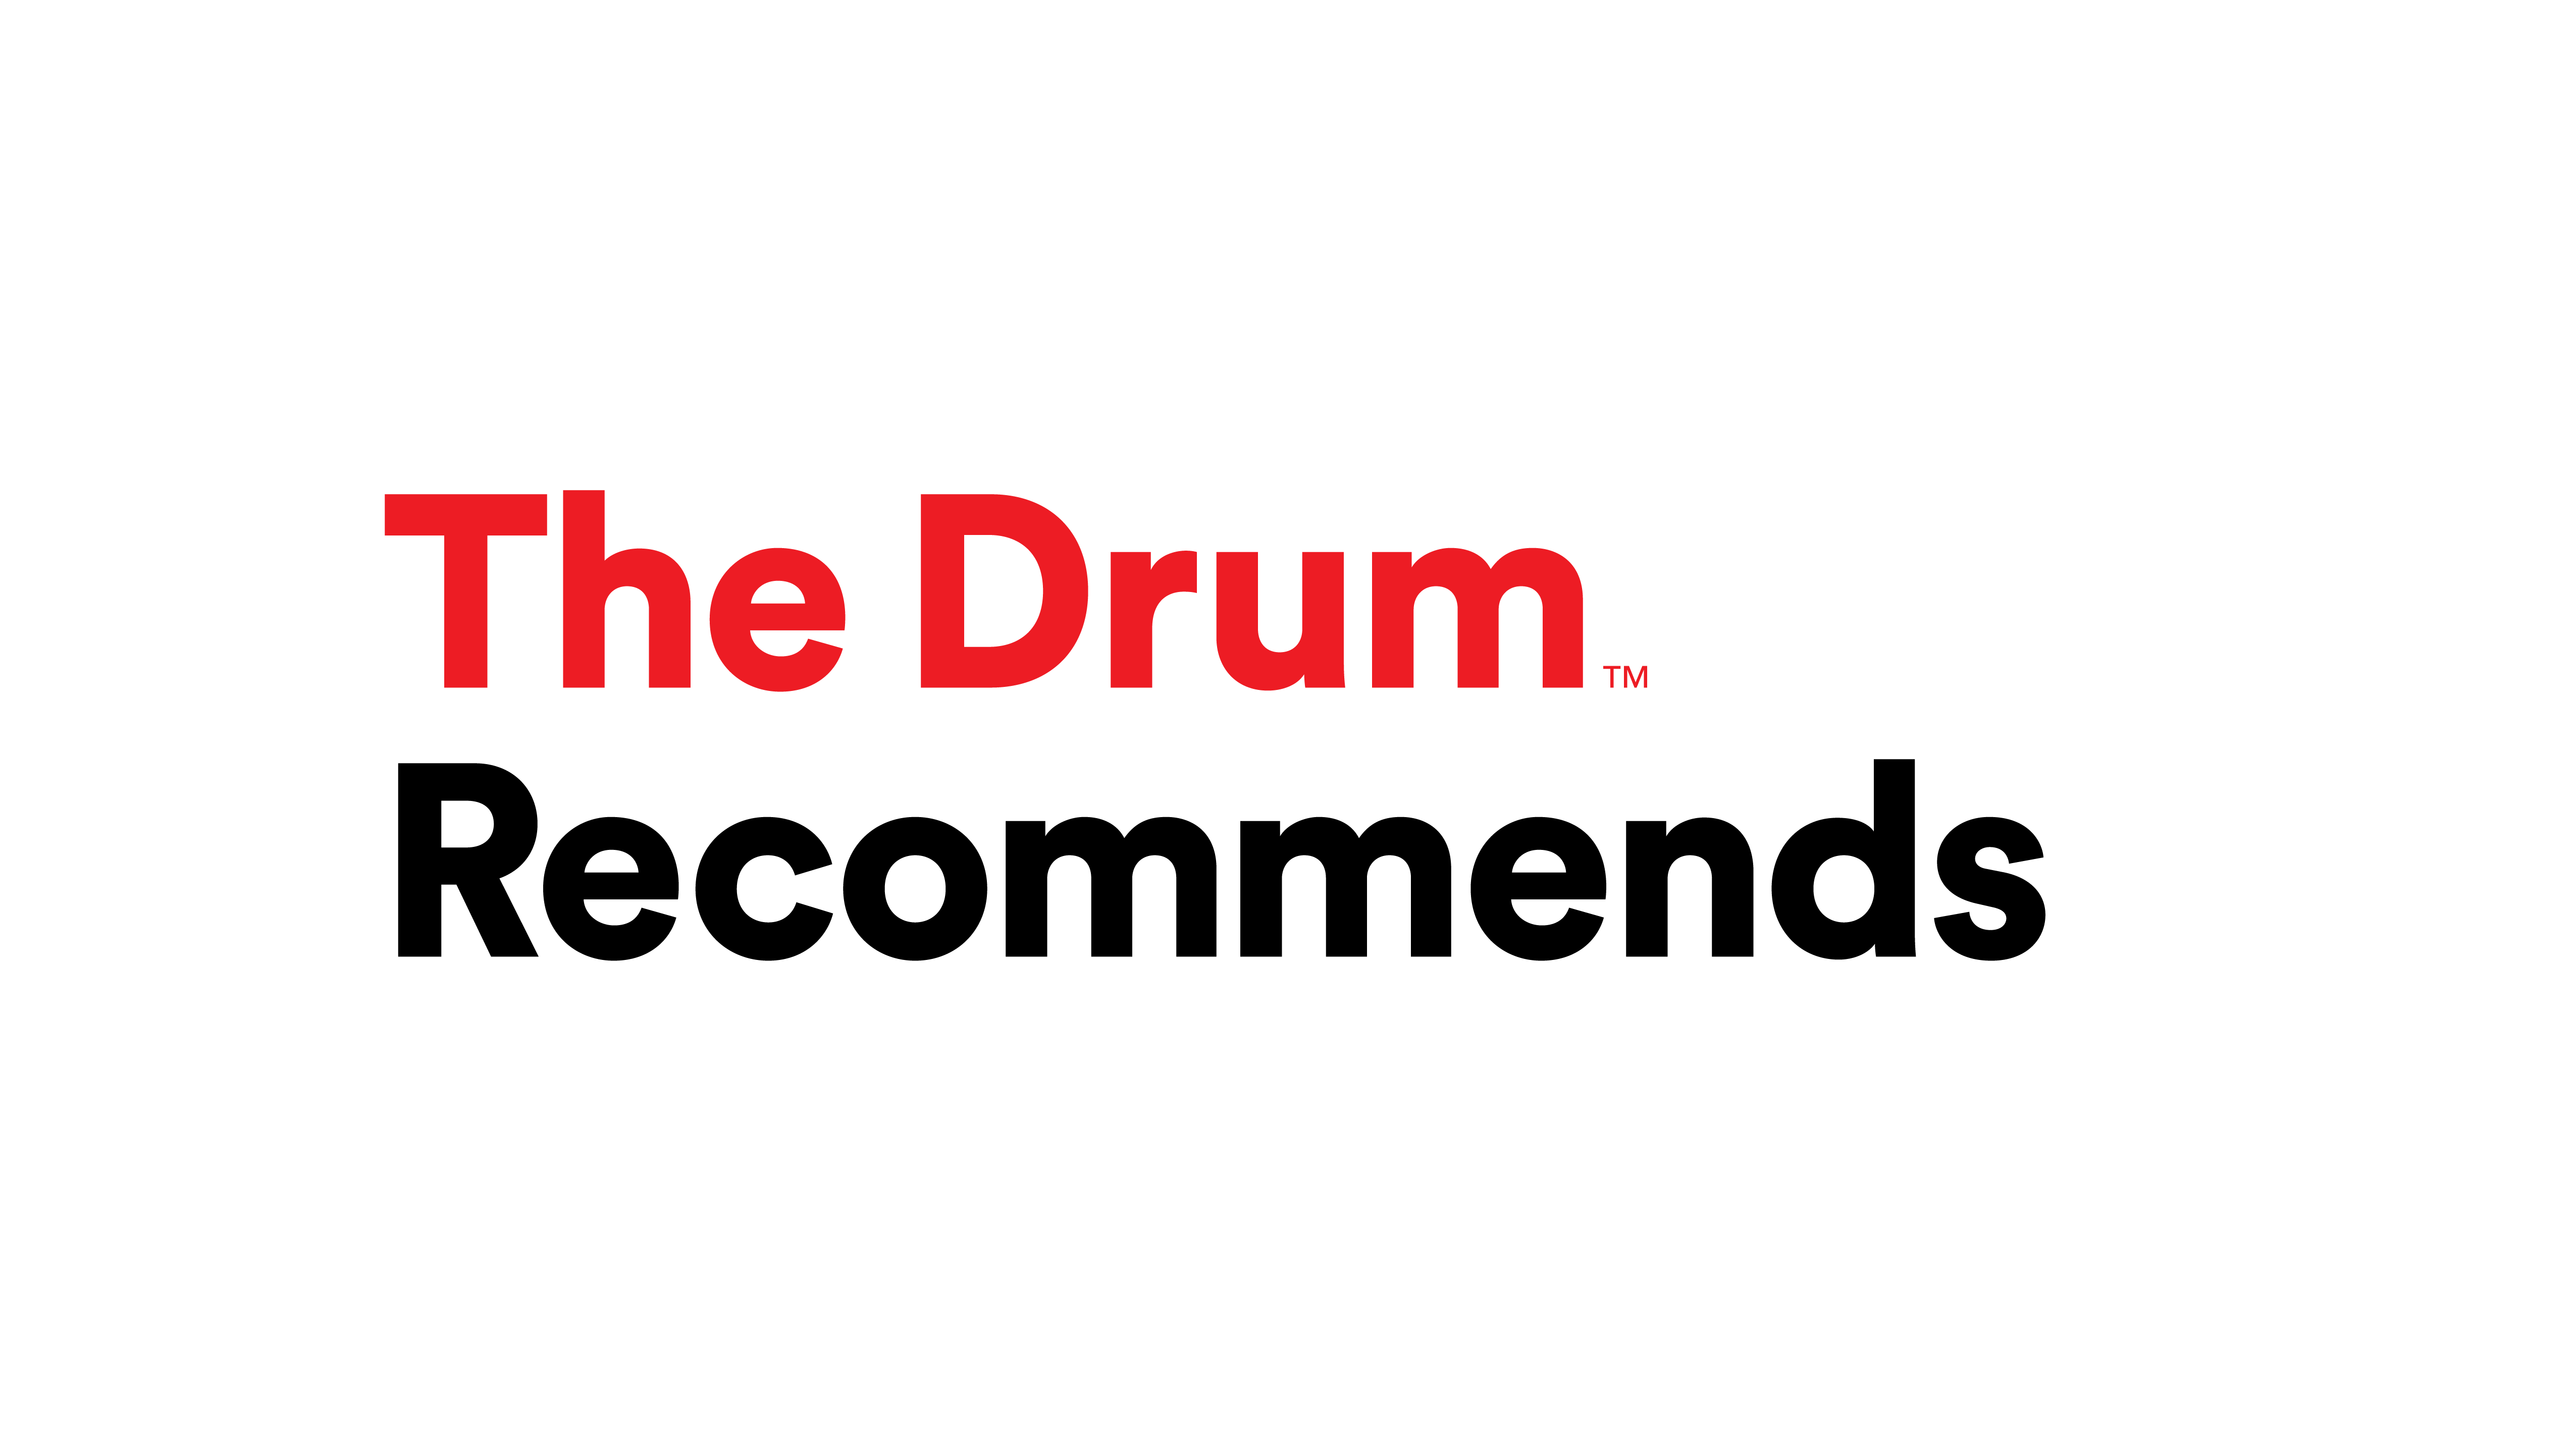 The Drum Recommends